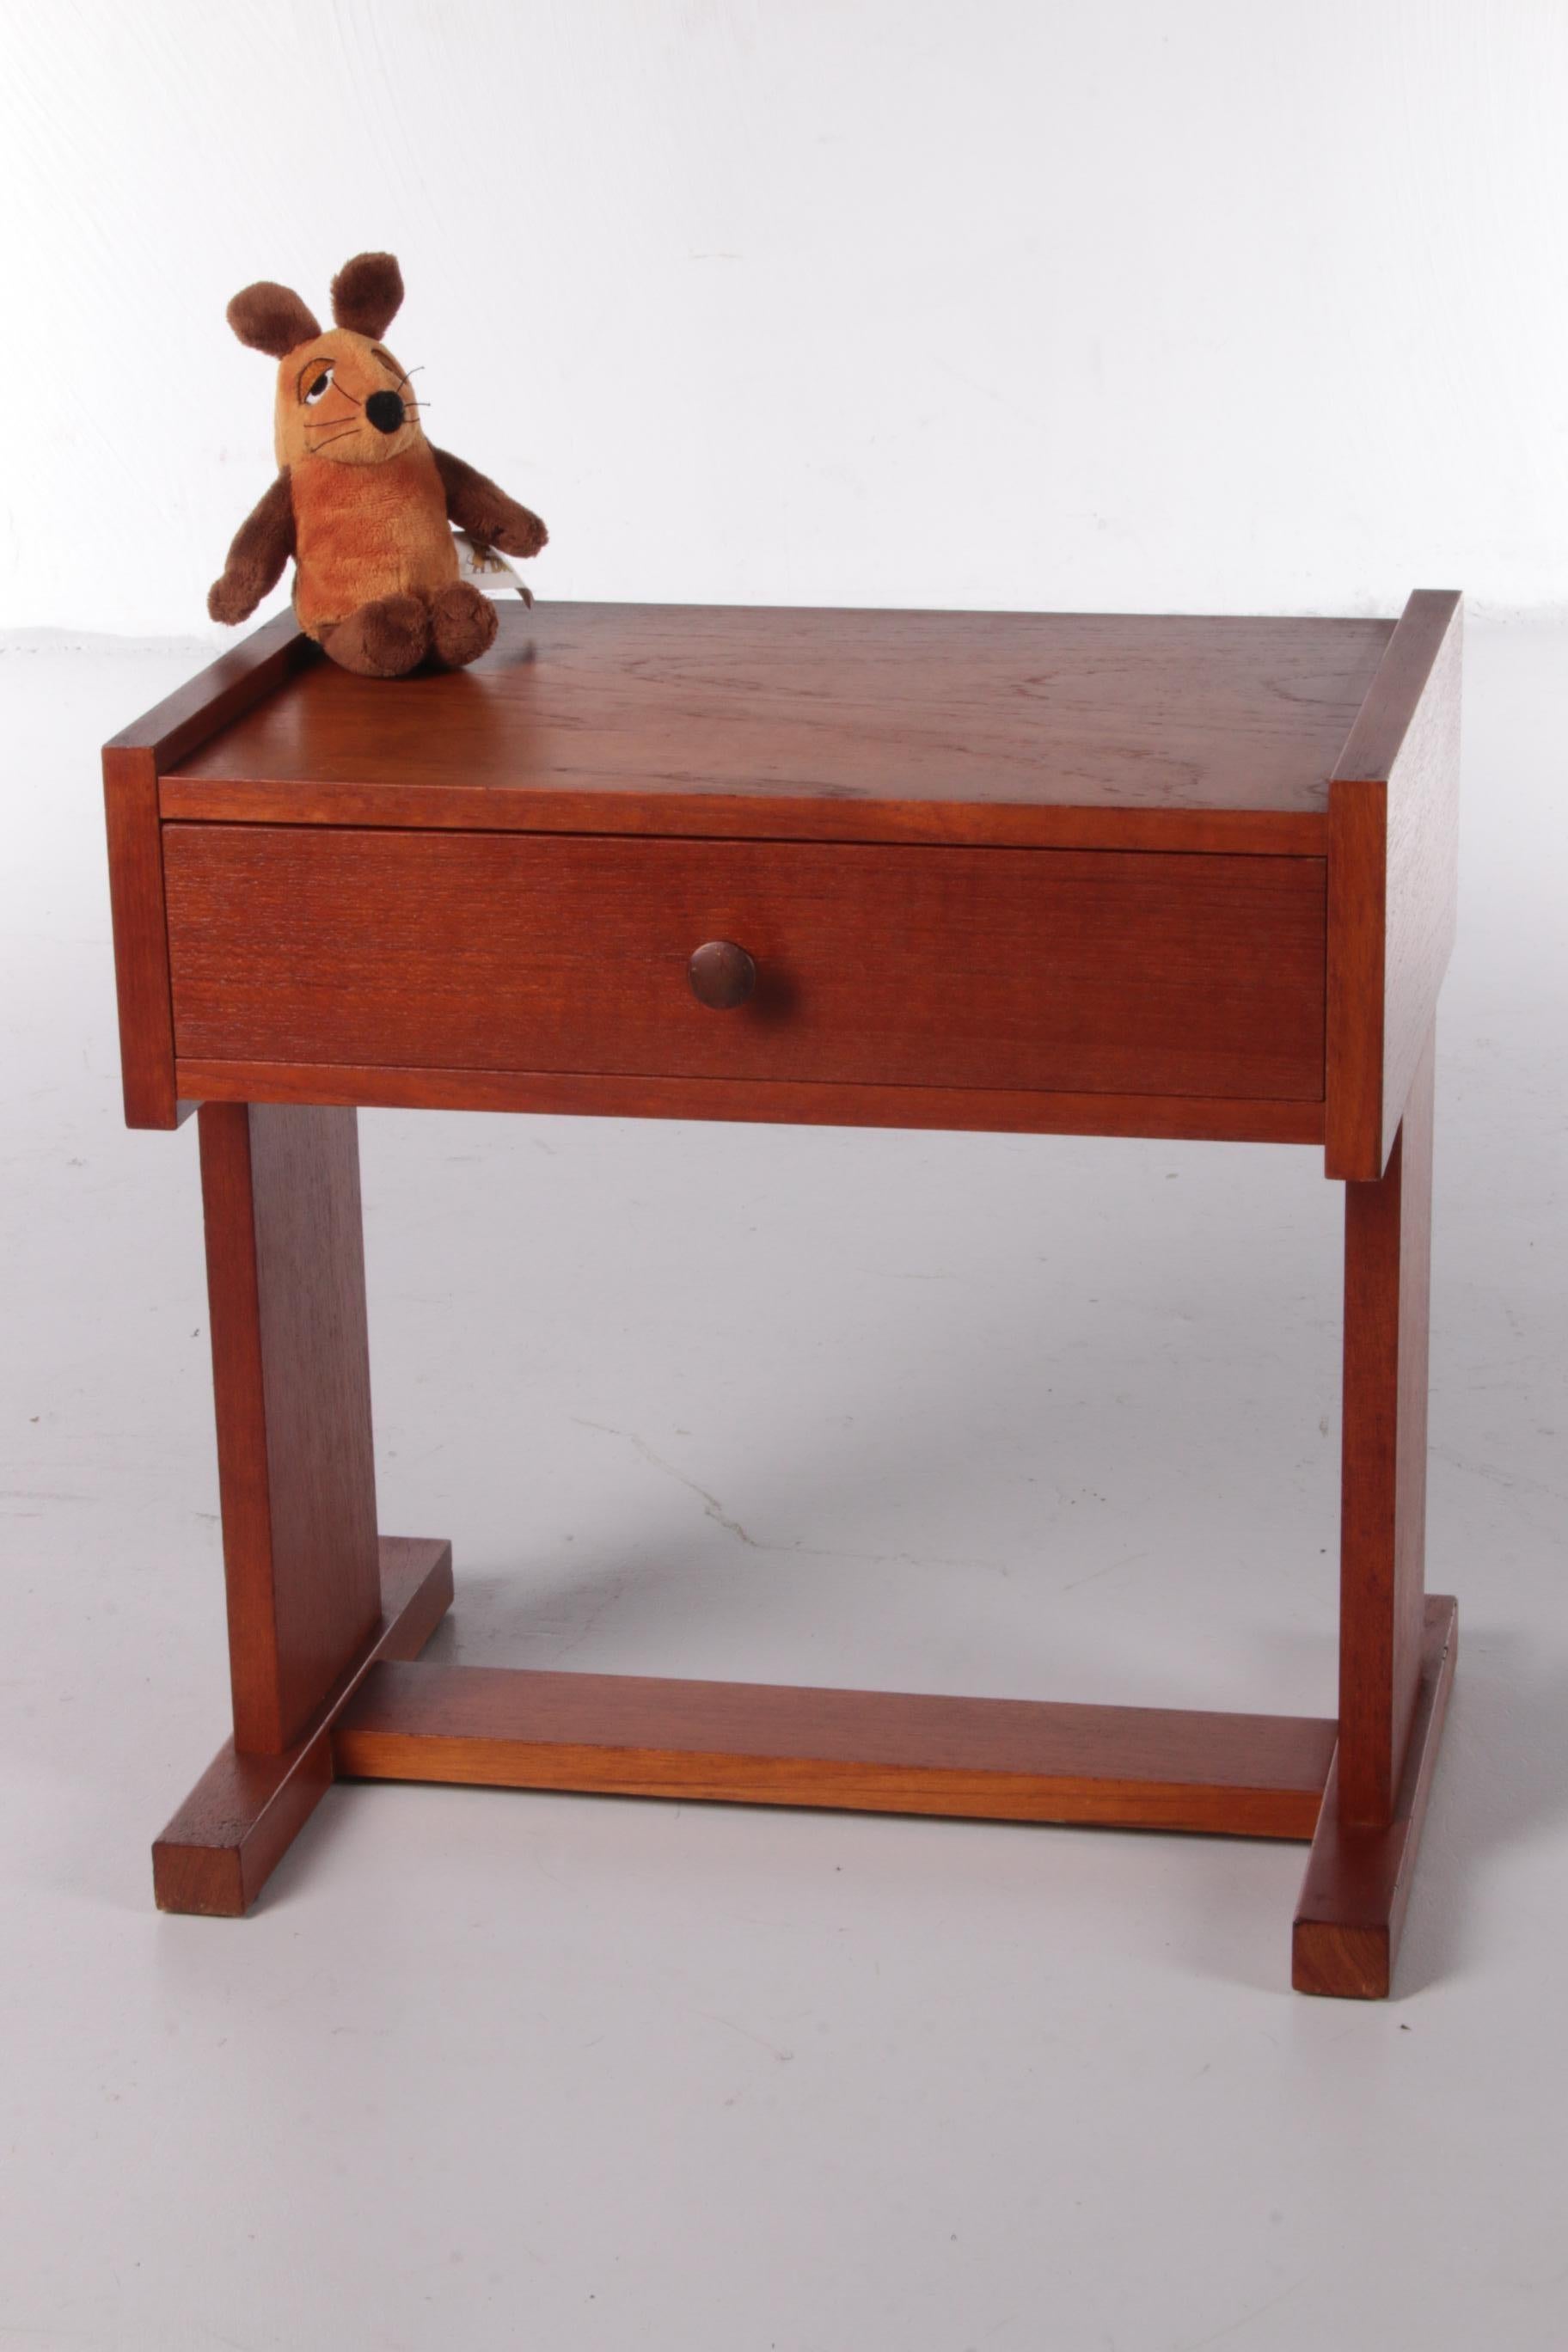 A nice compact Danish bedside table from the 1960s.

The simple design in combination with the light brown color of the teak gives this cabinet a stylish look.

The bedside table has a handy drawer for storing things.

Very charming legs that